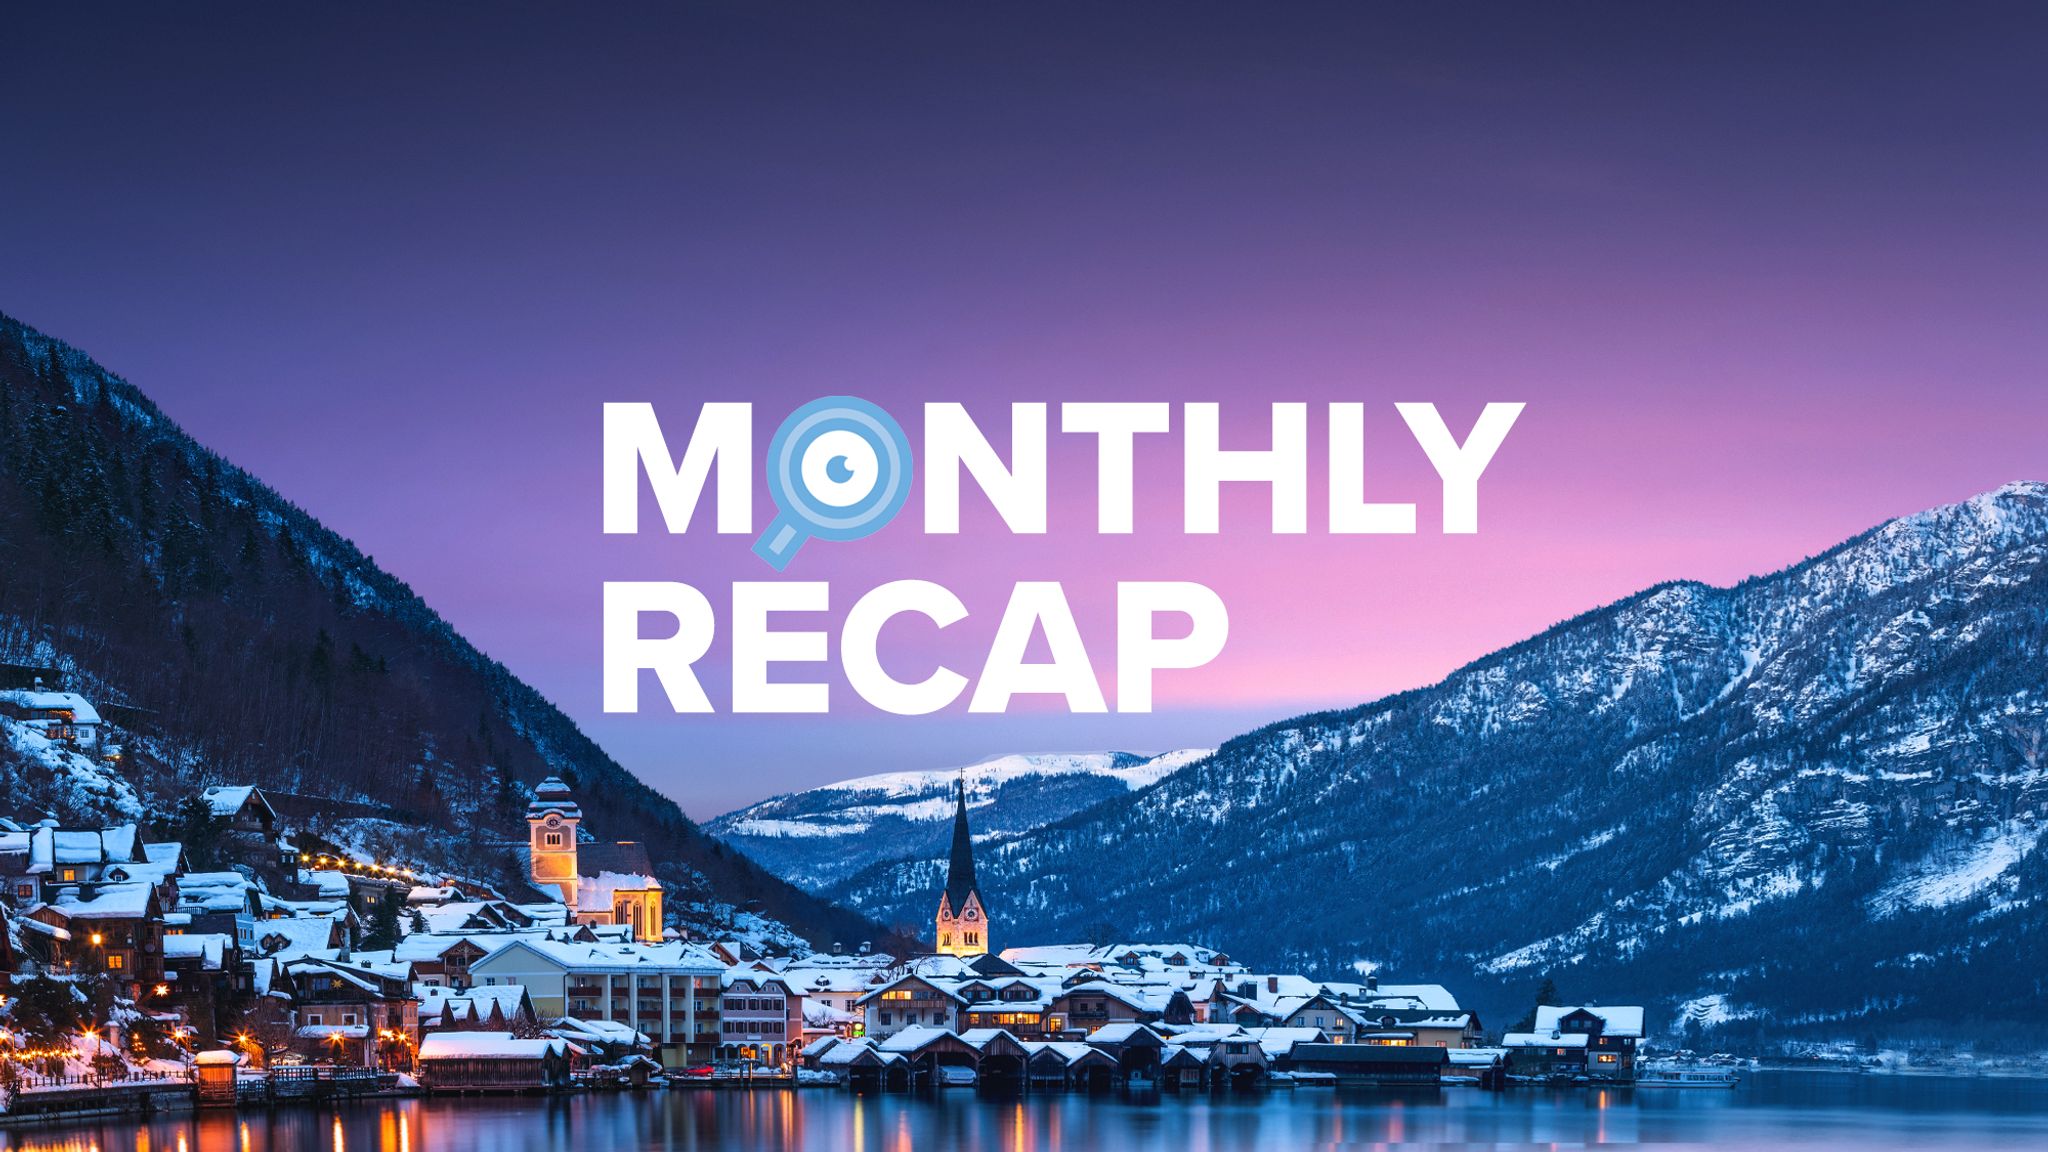 Image of Alpine village on lake in Europe with text of Monthly Recap overlayed